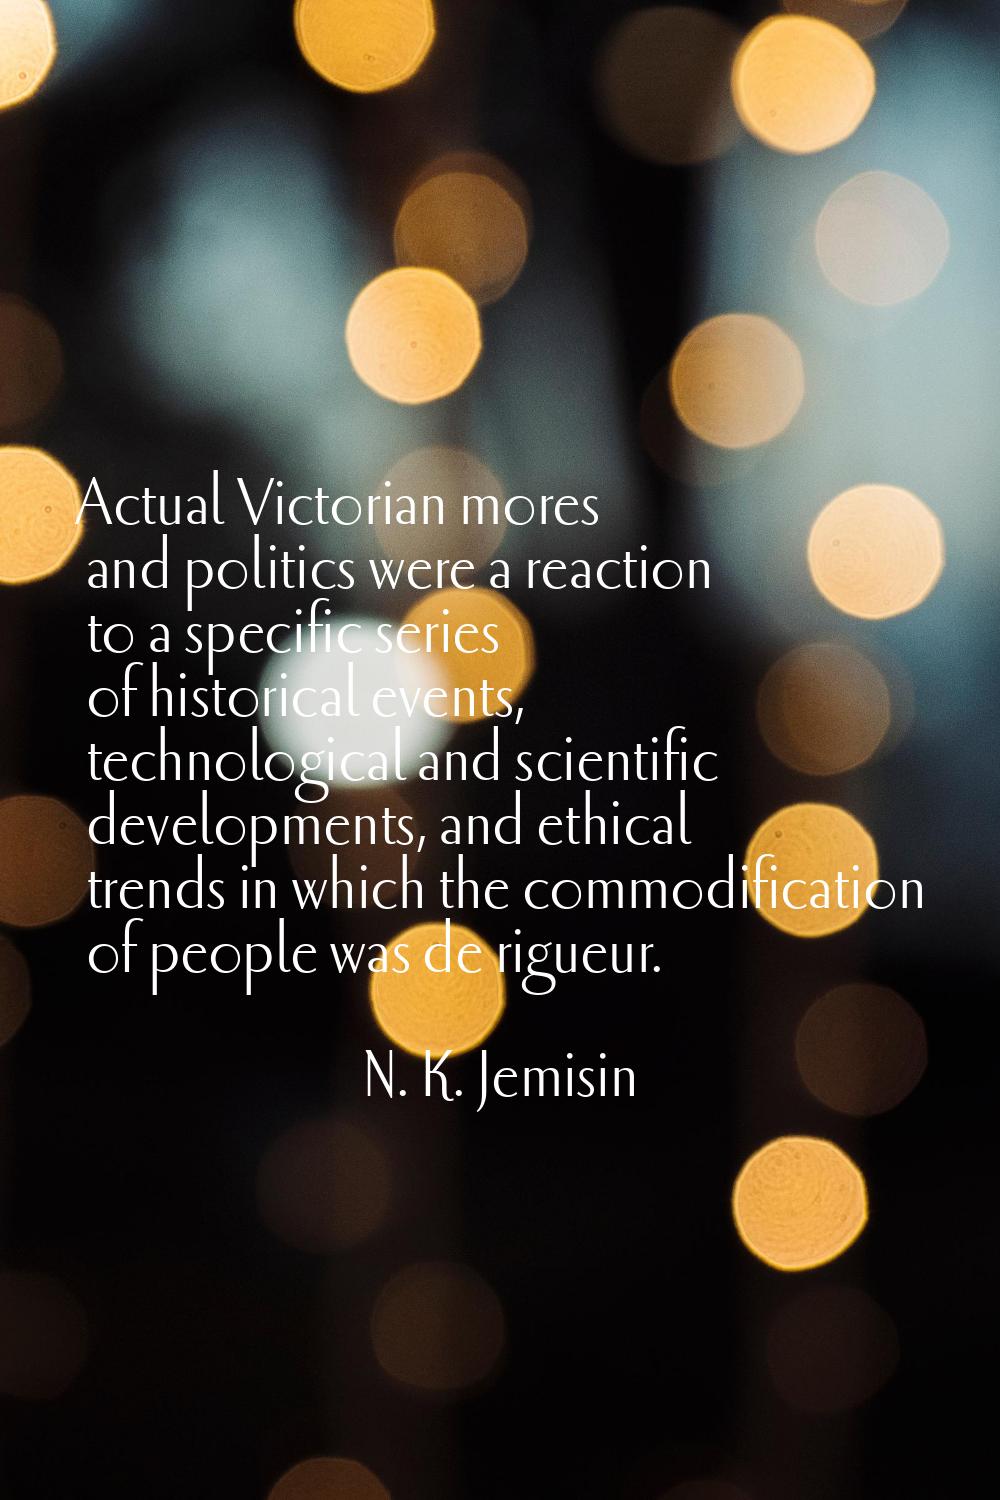 Actual Victorian mores and politics were a reaction to a specific series of historical events, tech